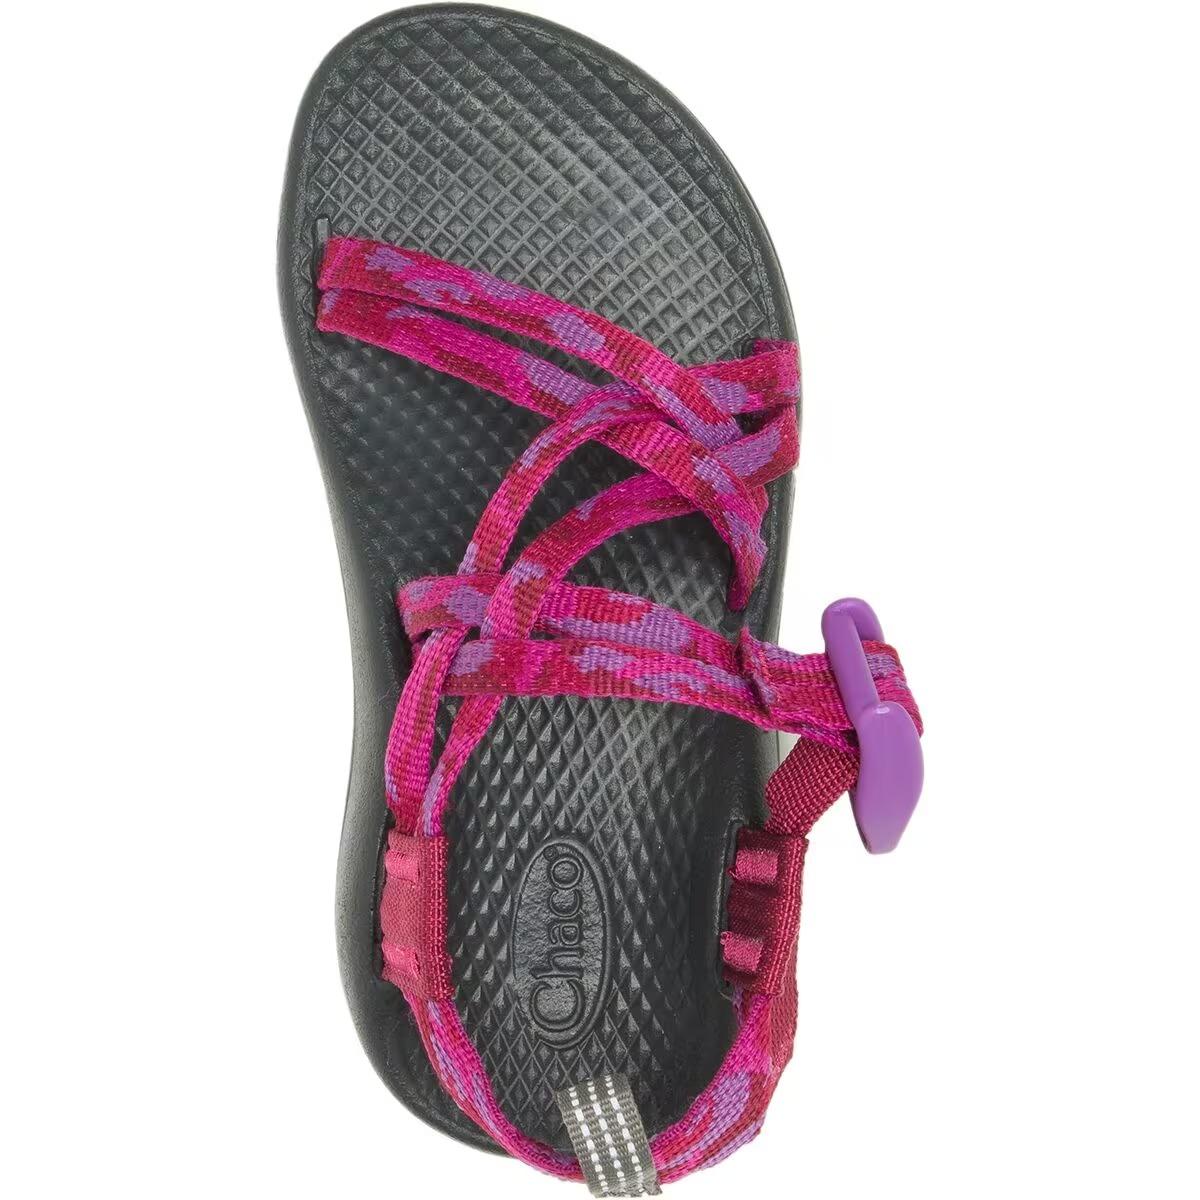 Chaco ZX/1 EcoTread Sandal - Kids'